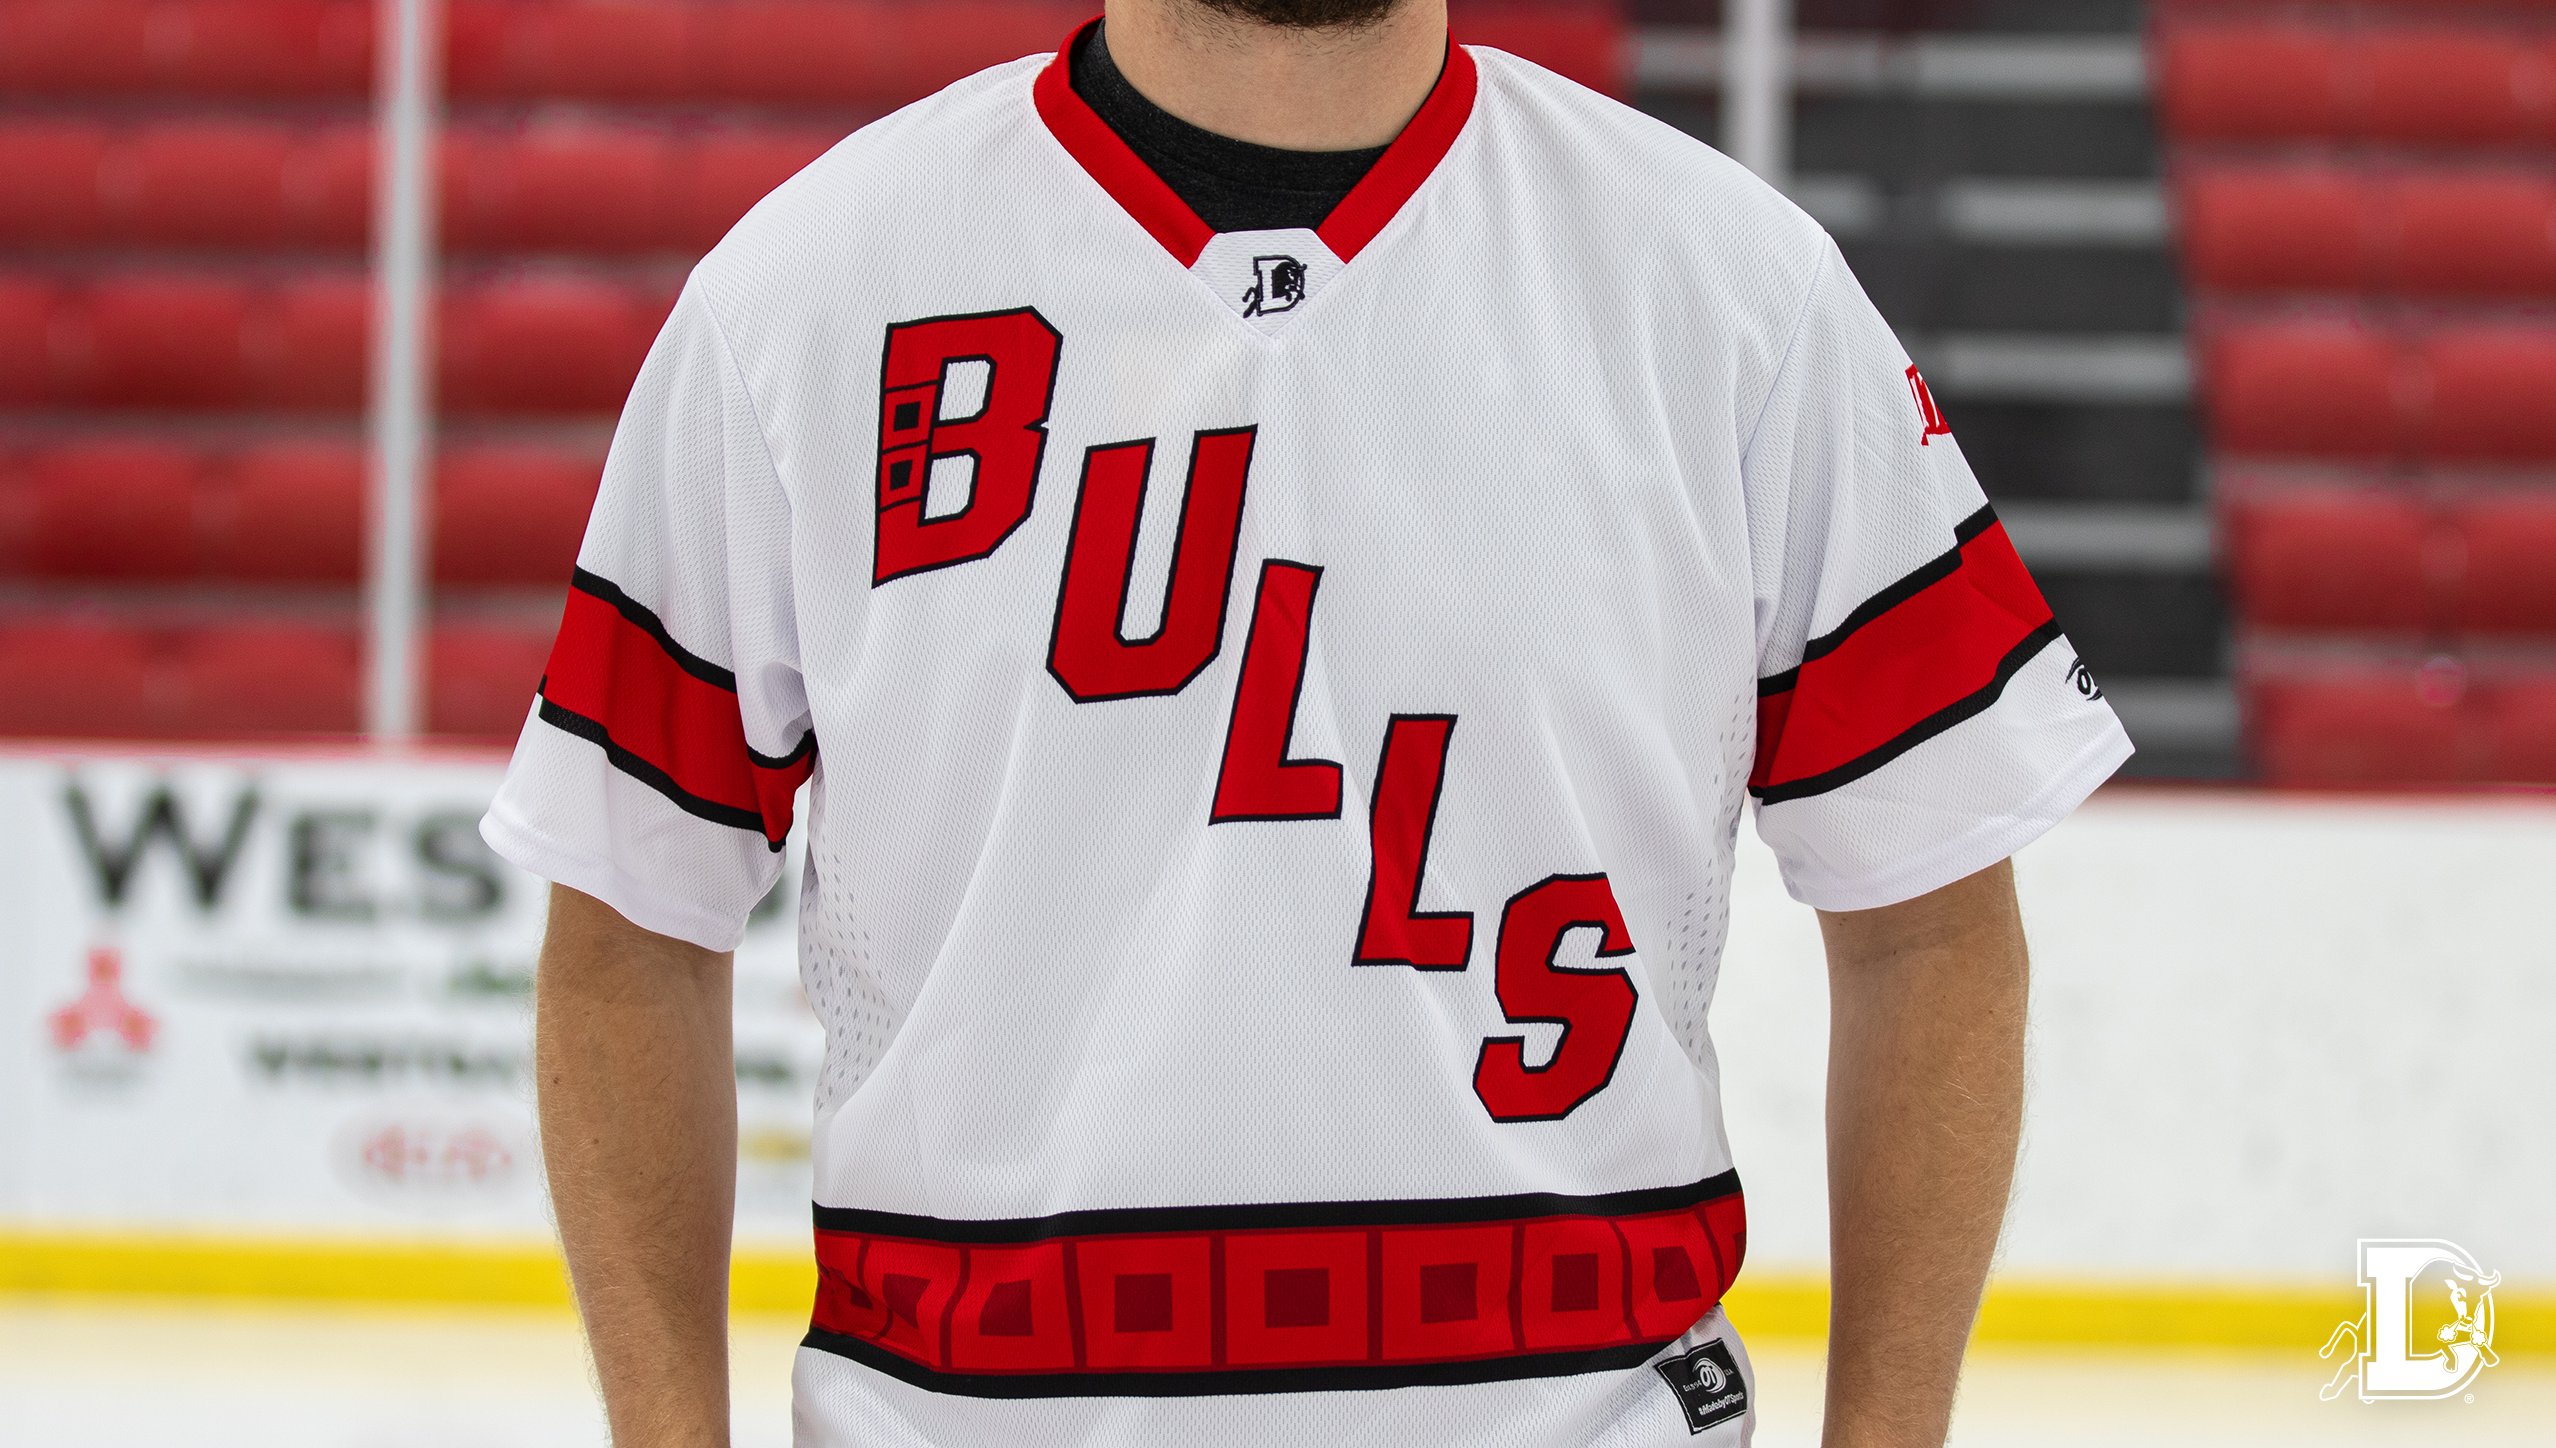 Bulls Team Up with RUNAWAY for DURM Night Uniforms